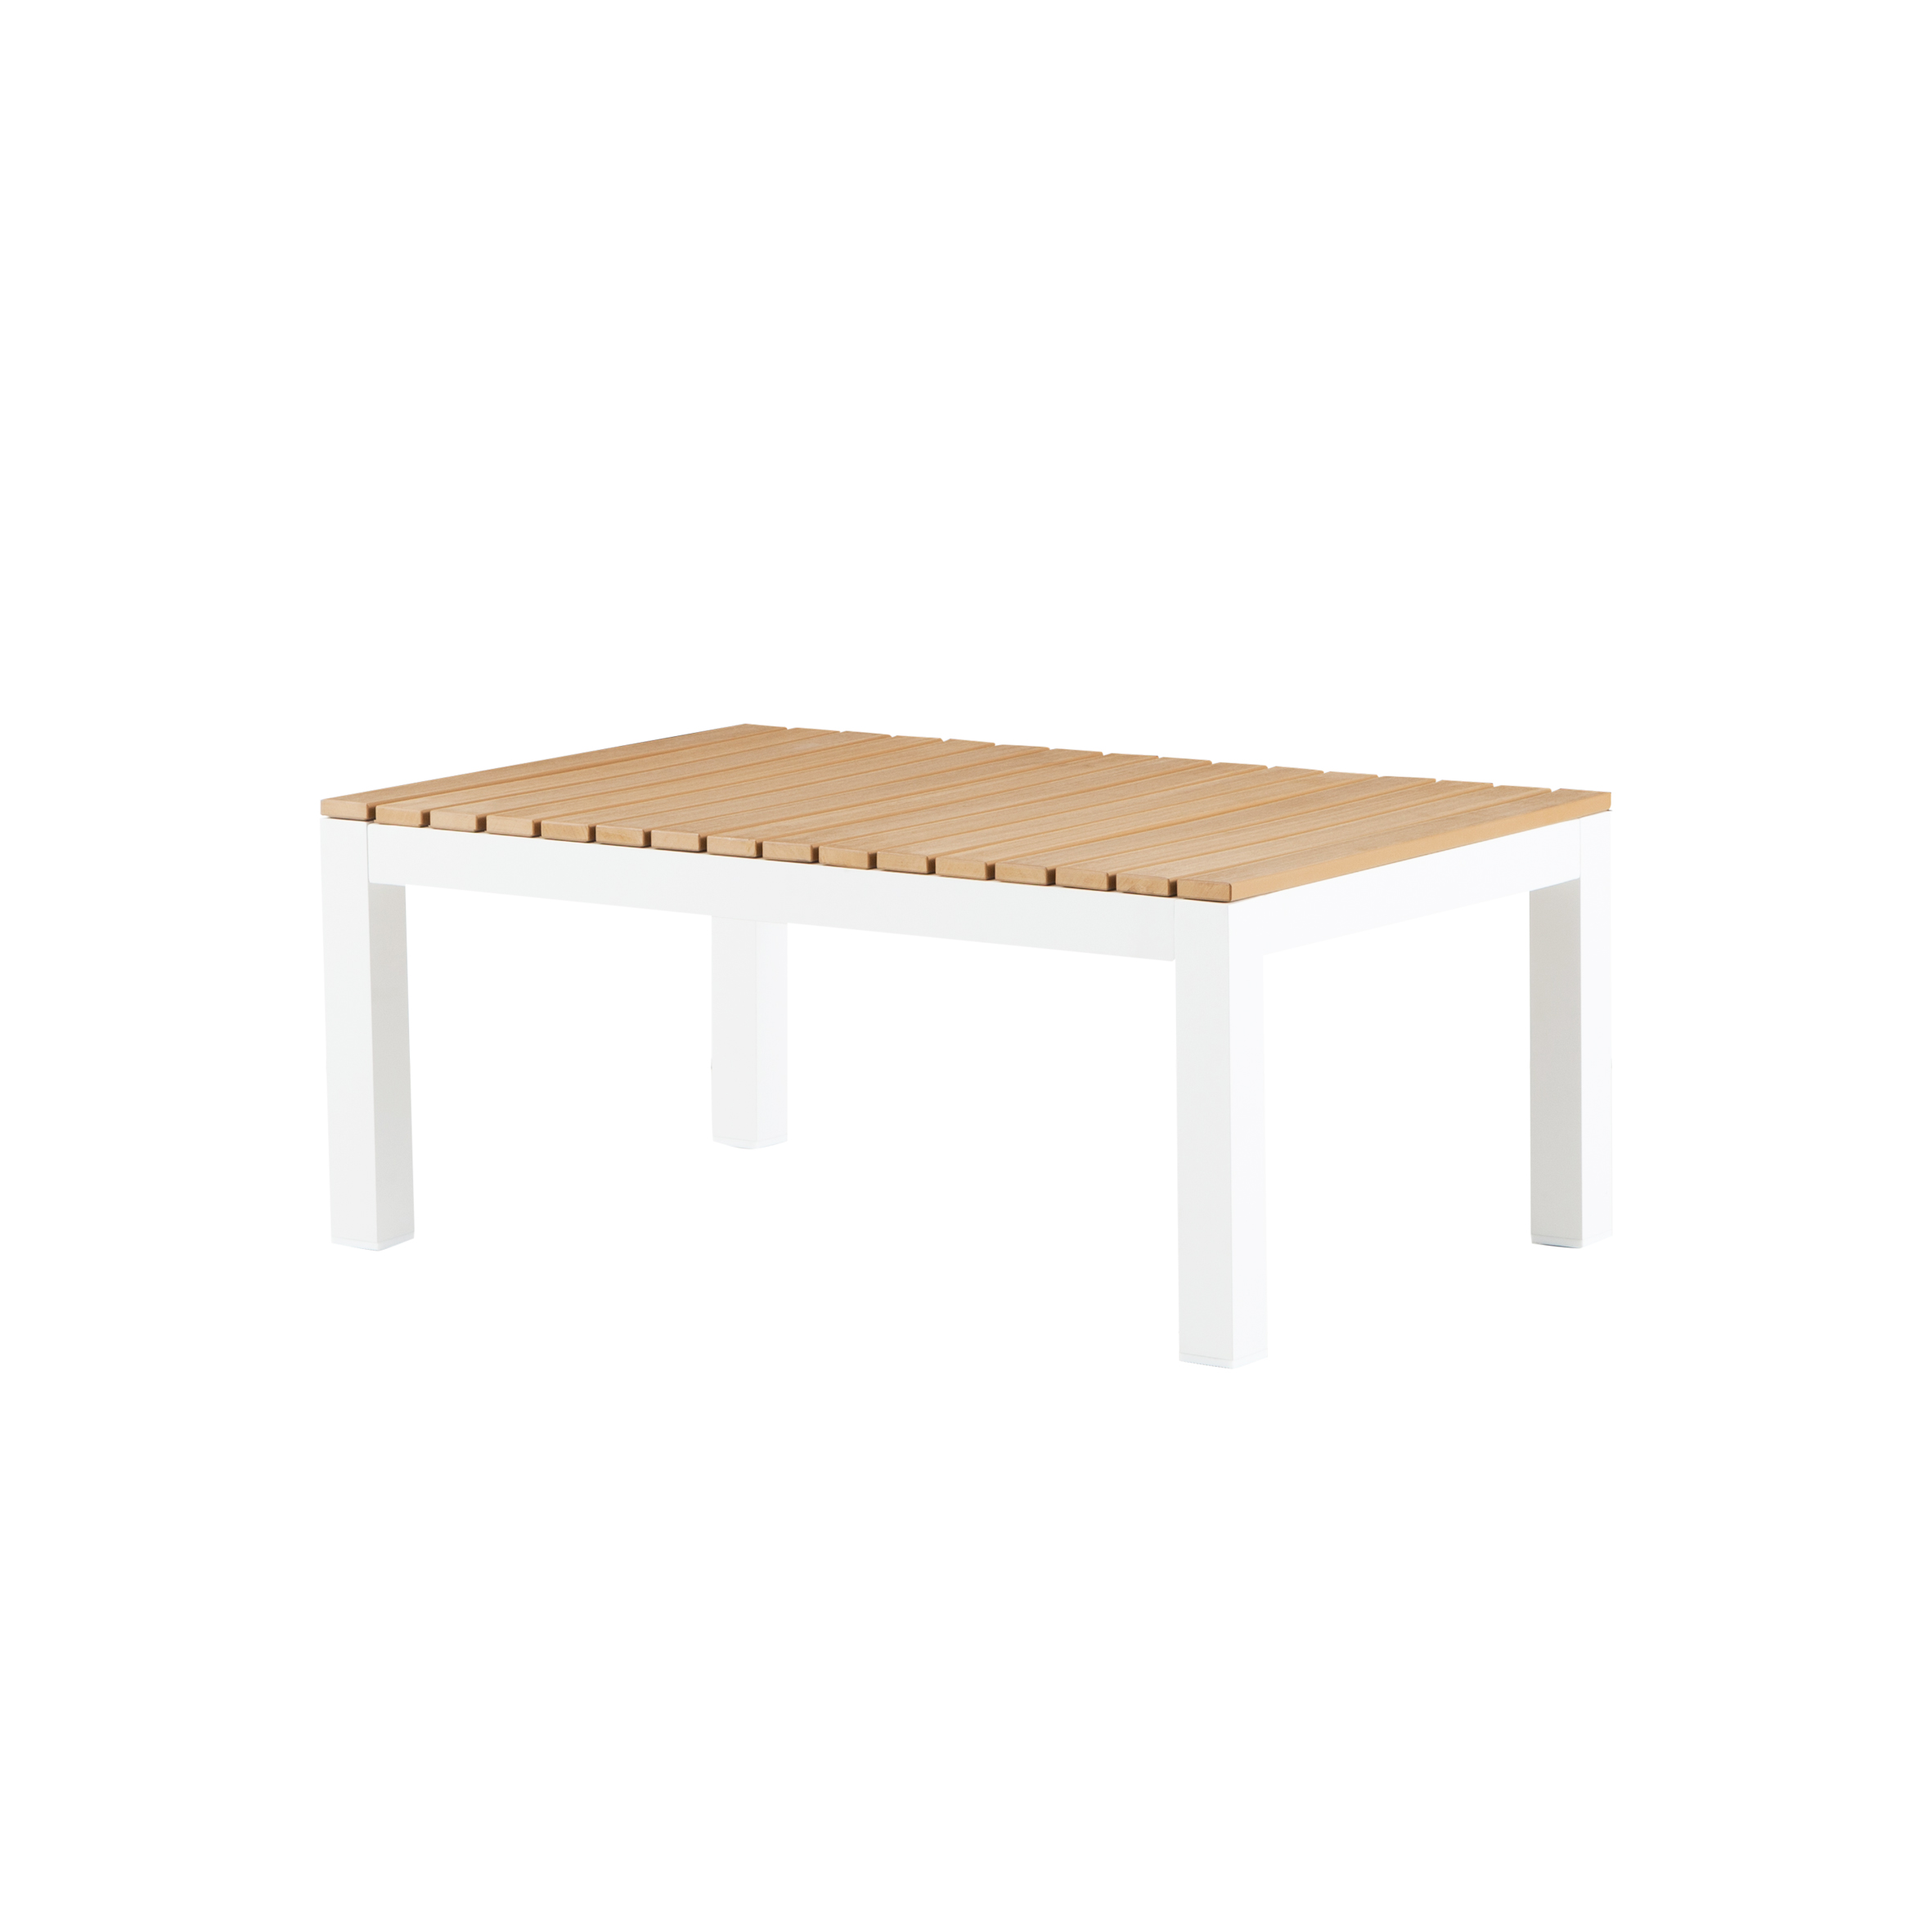 Snow white coffee table (Poly wood) S1